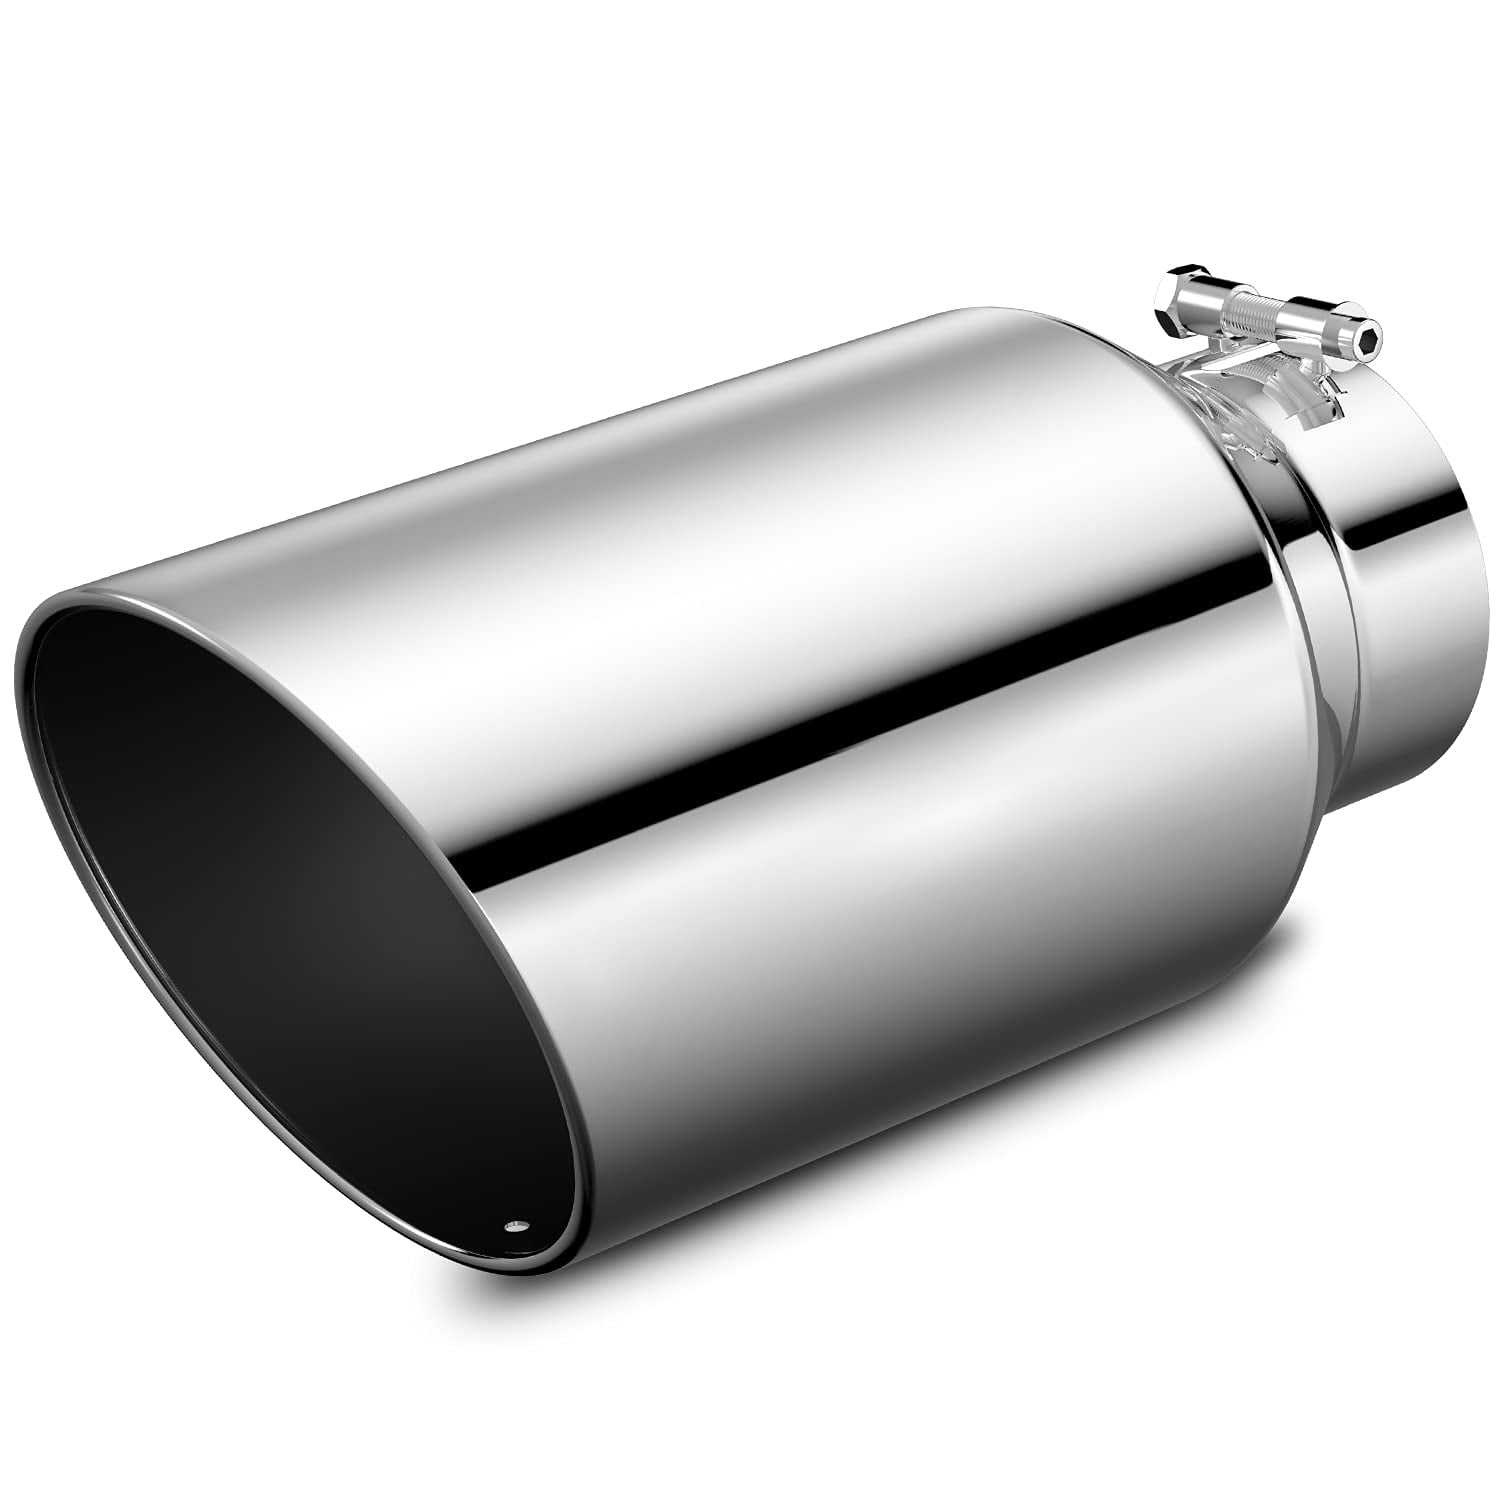 LCGP 4 Inlet x 5 Outlet x 12 Overall Length Clamp On Universal Stainless Steel Polished Diesel Exhaust Tailpipe Tip 4 Inch Inlet Exhaust Tip